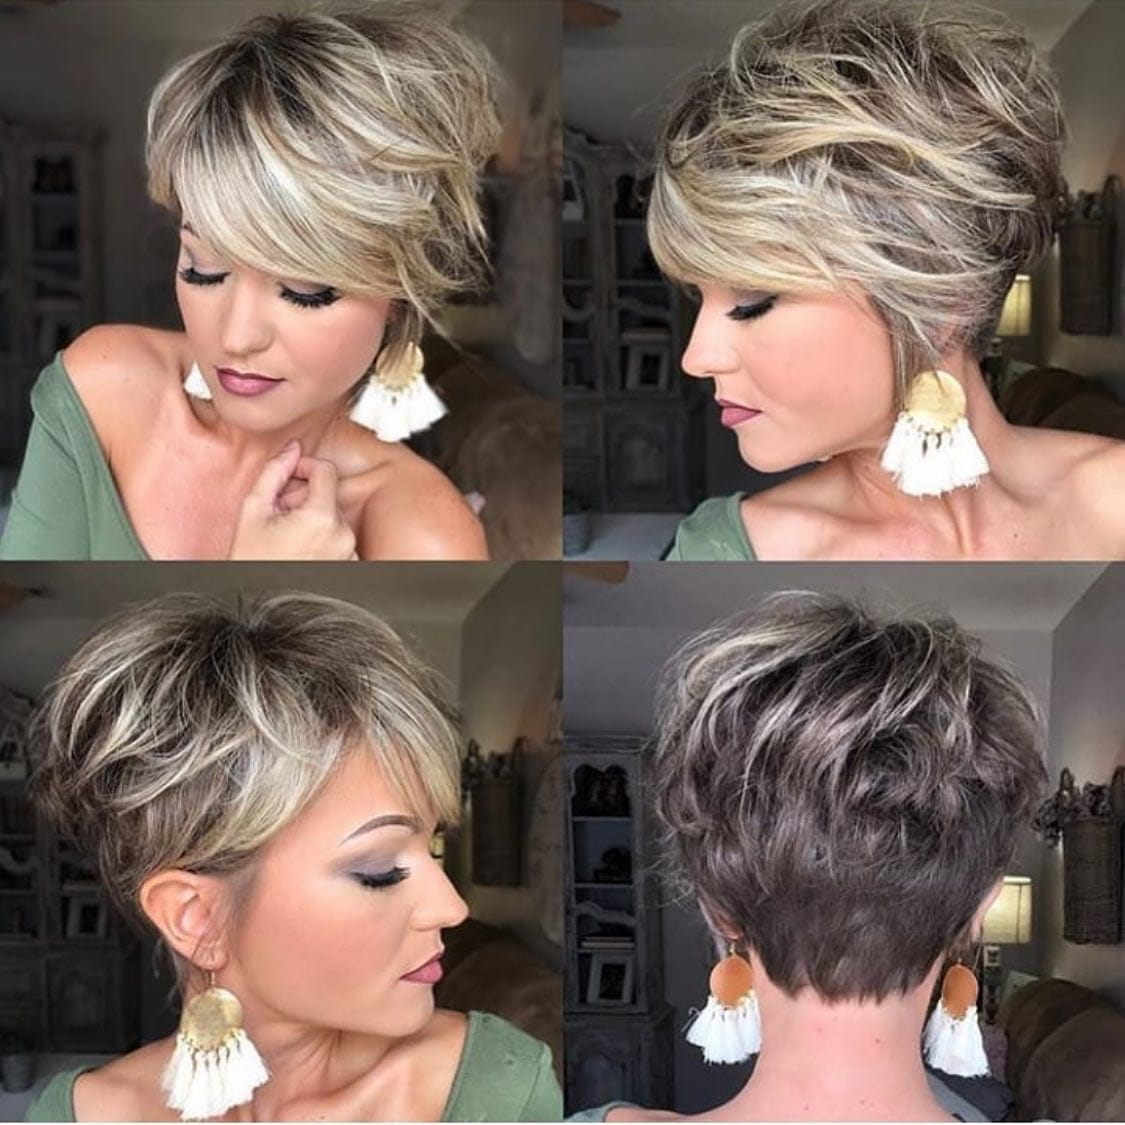 100+ Best Short Hairstyles & Haircuts For Women images 1